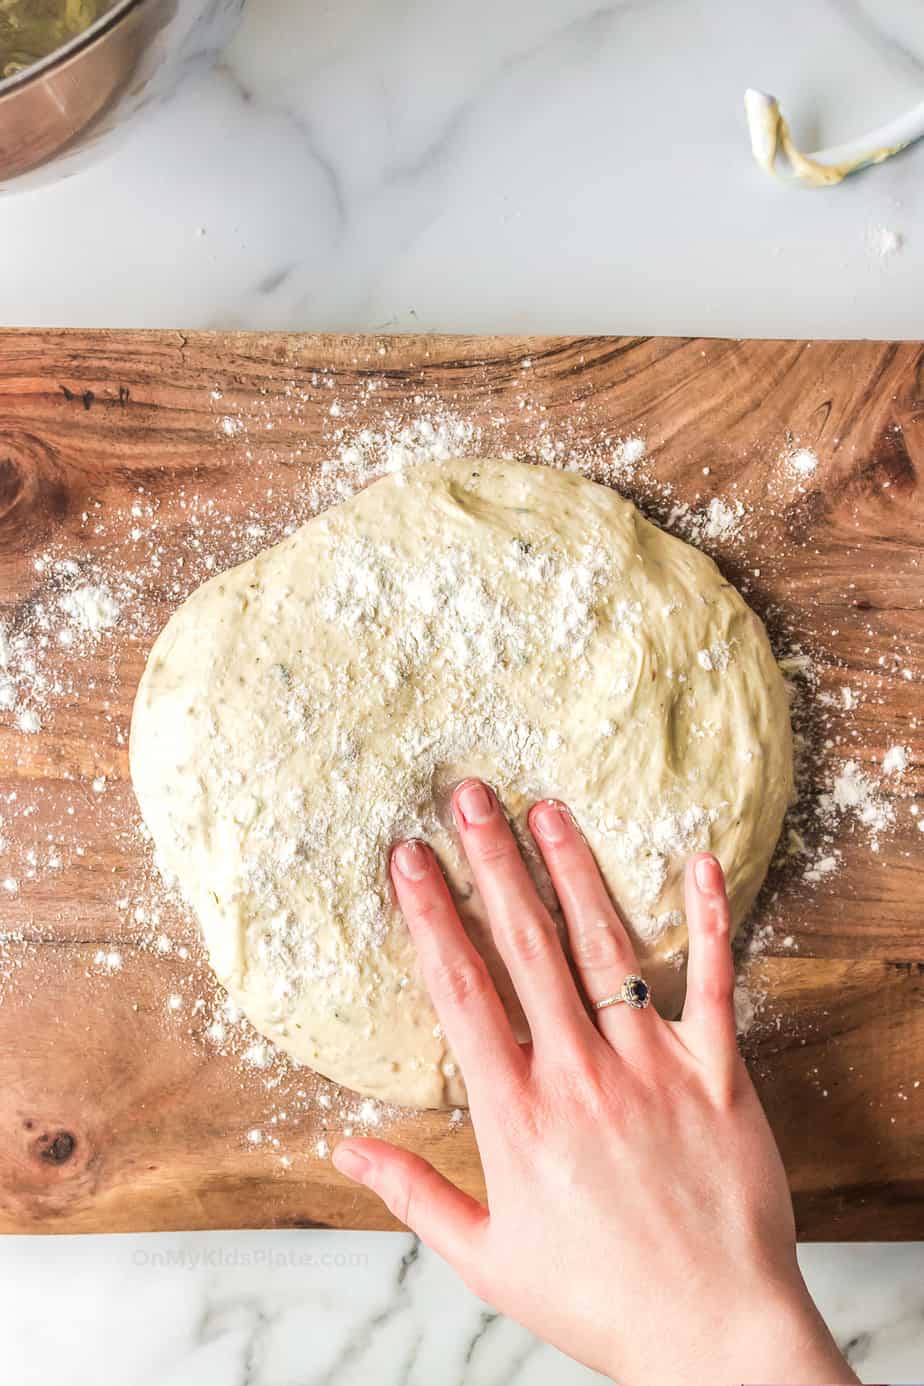 Hand touching pizza dough to roll it out